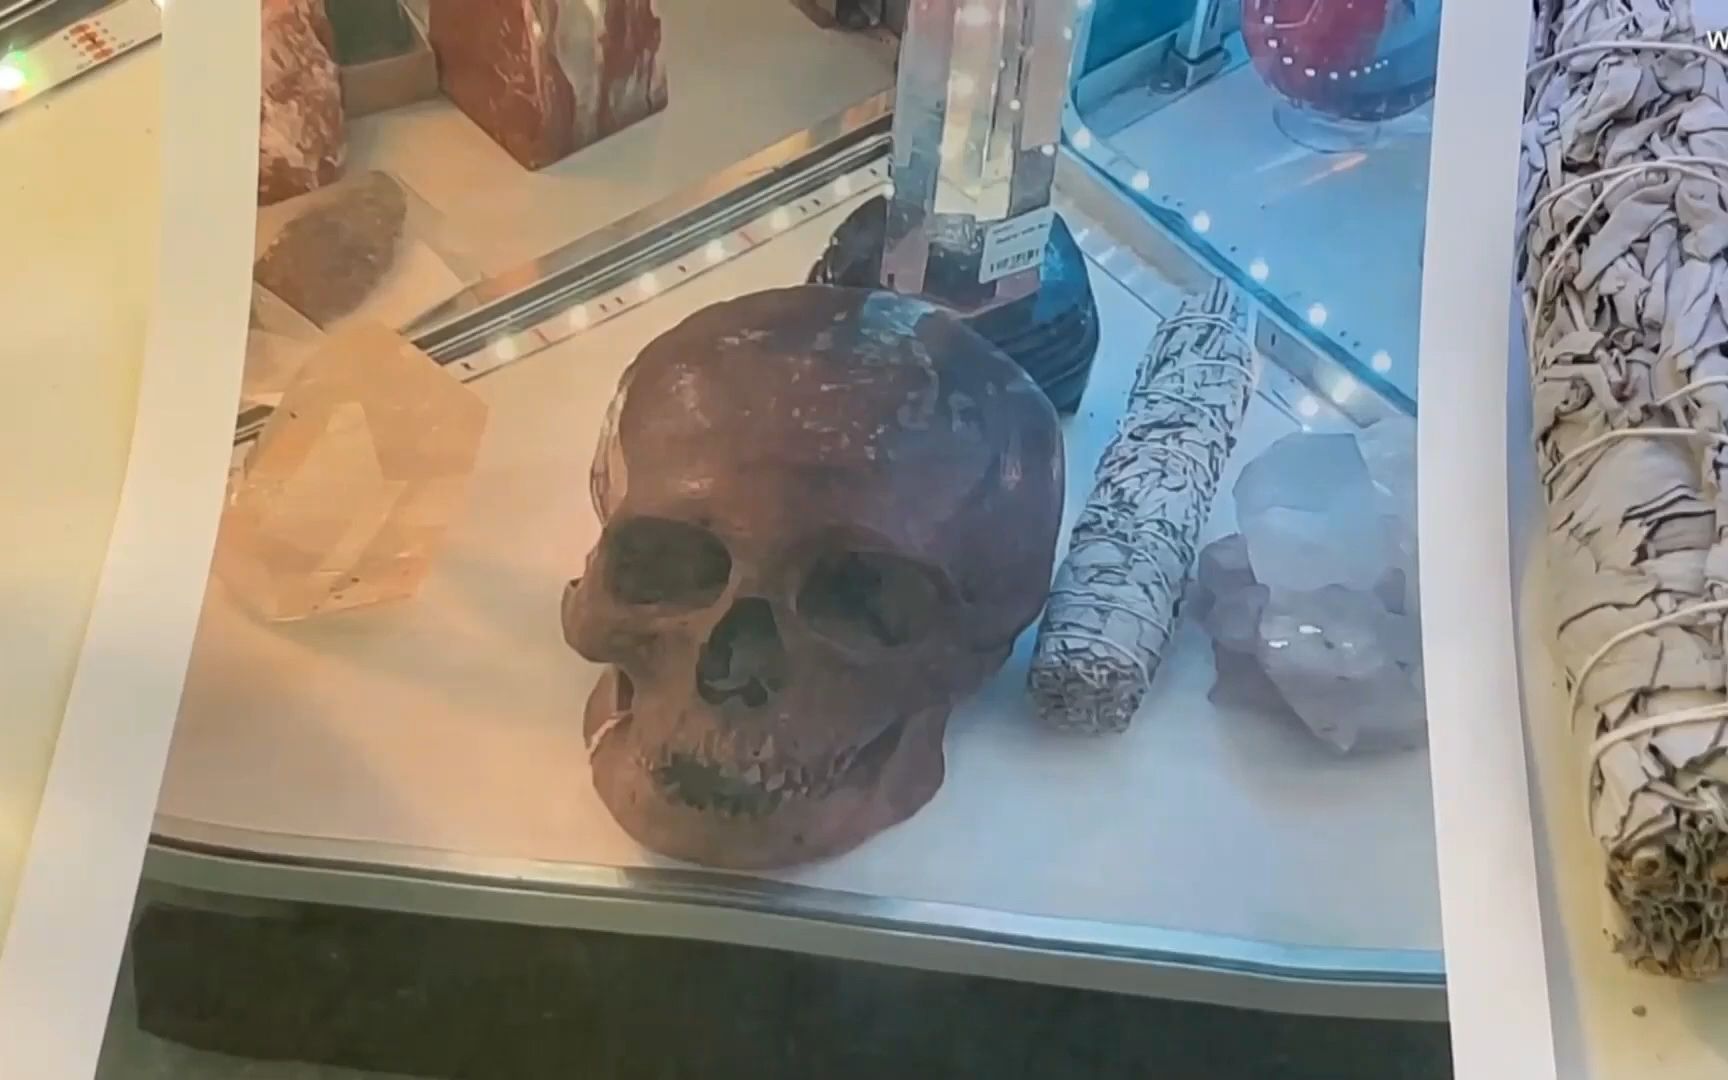 Human Skull Found for Sale in Antiques Market